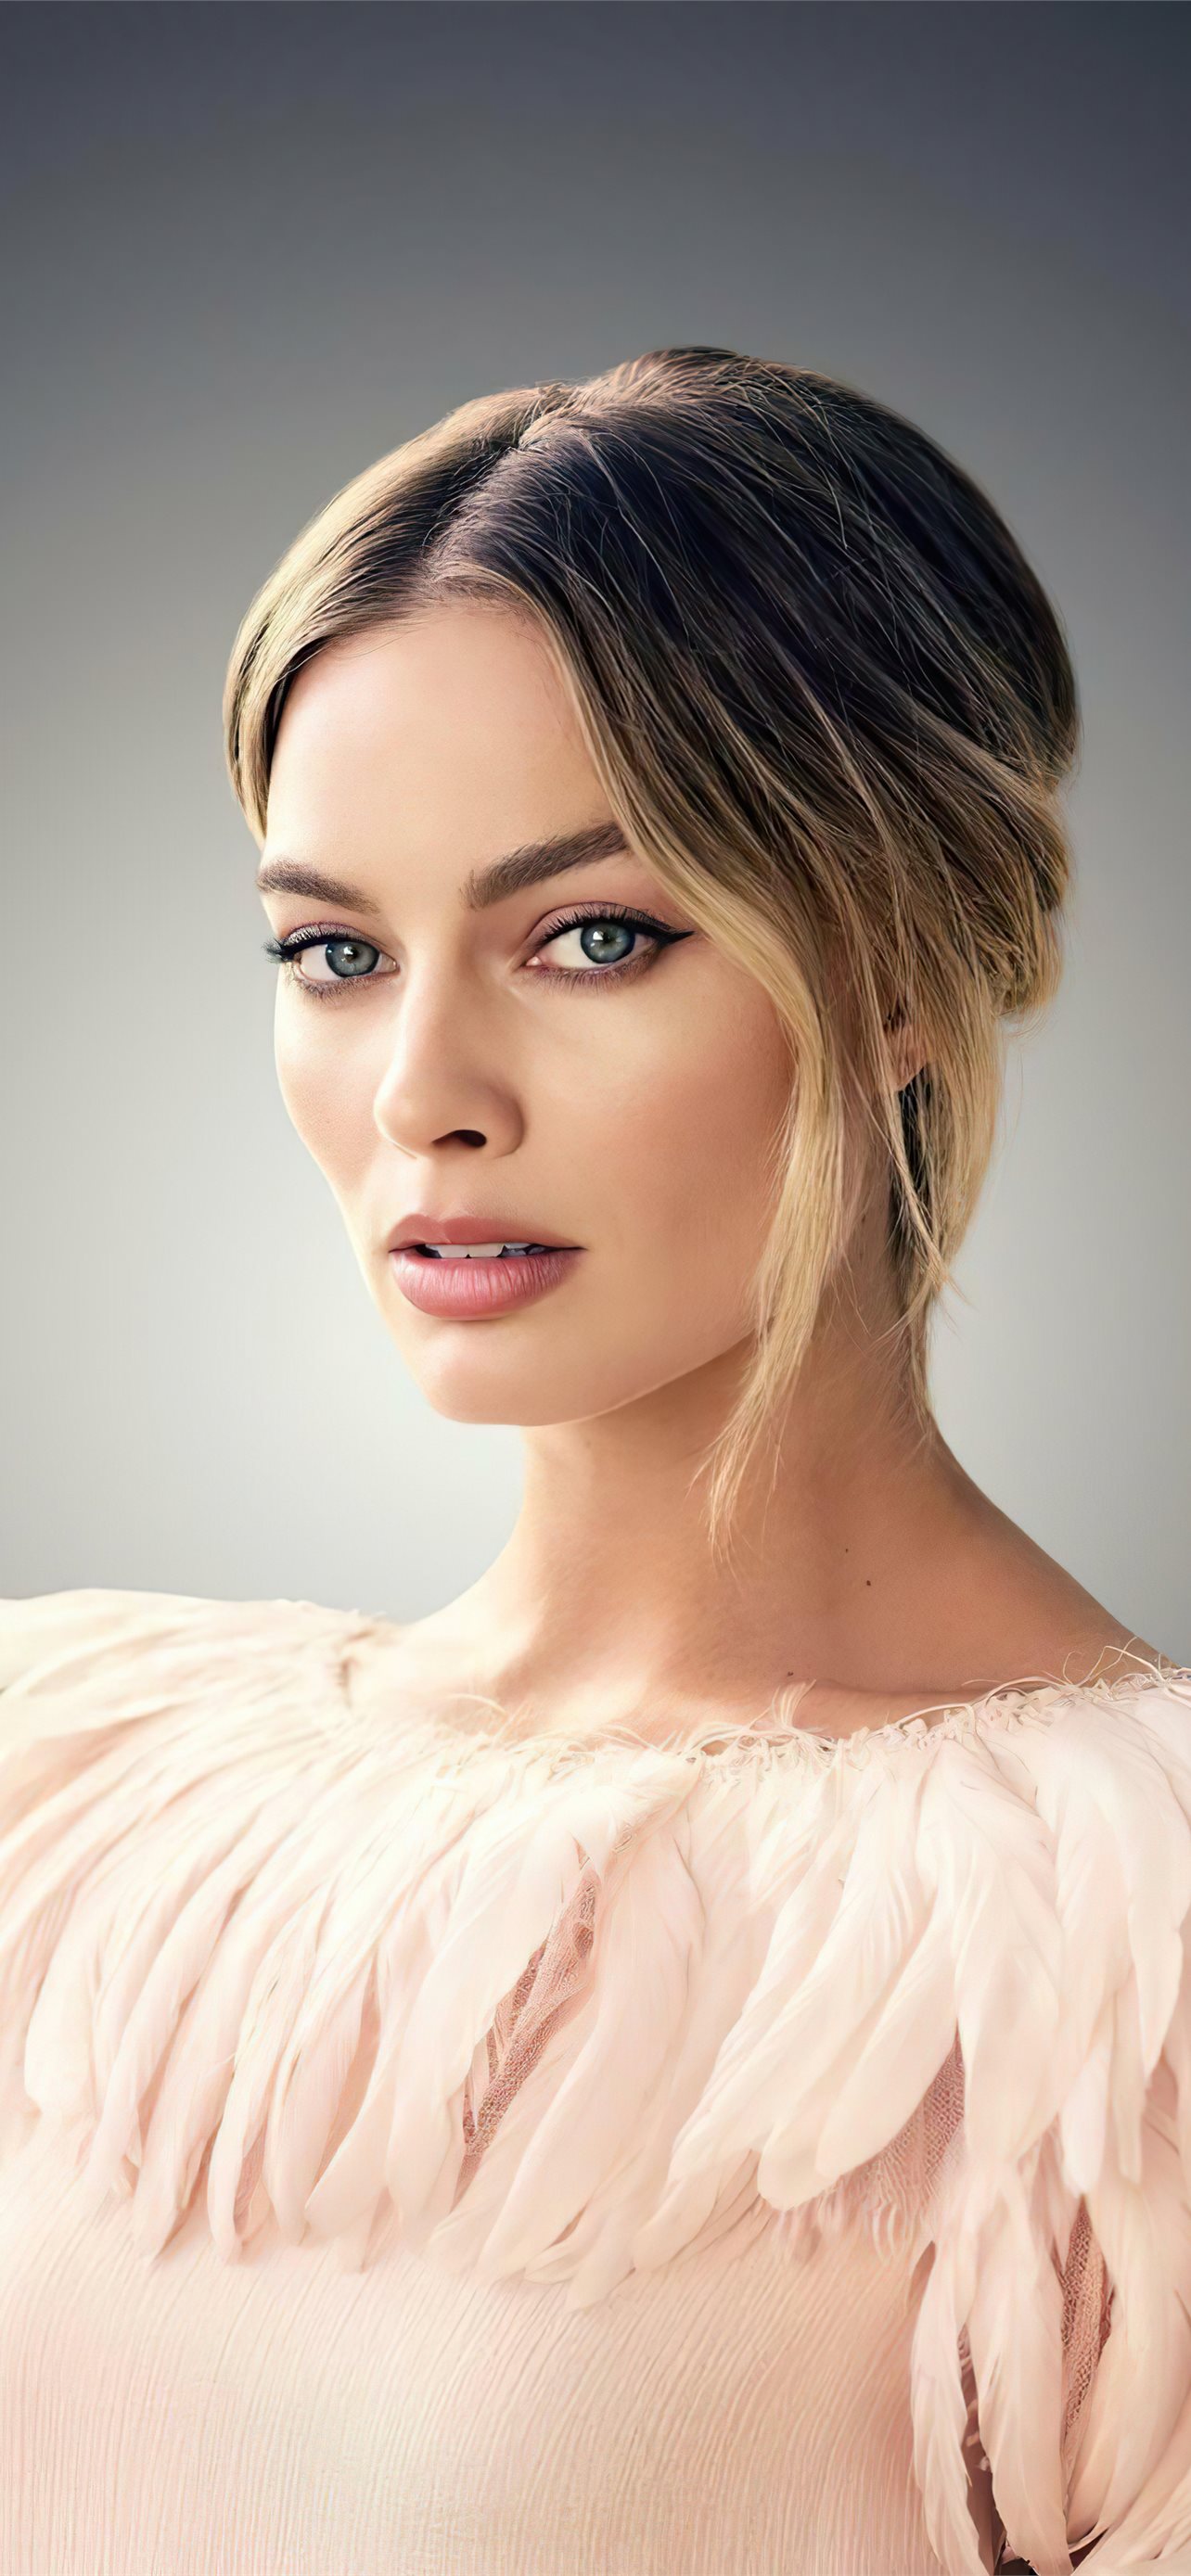 margot robbie art streiber photoshoot for glamour ... iPhone Wallpapers